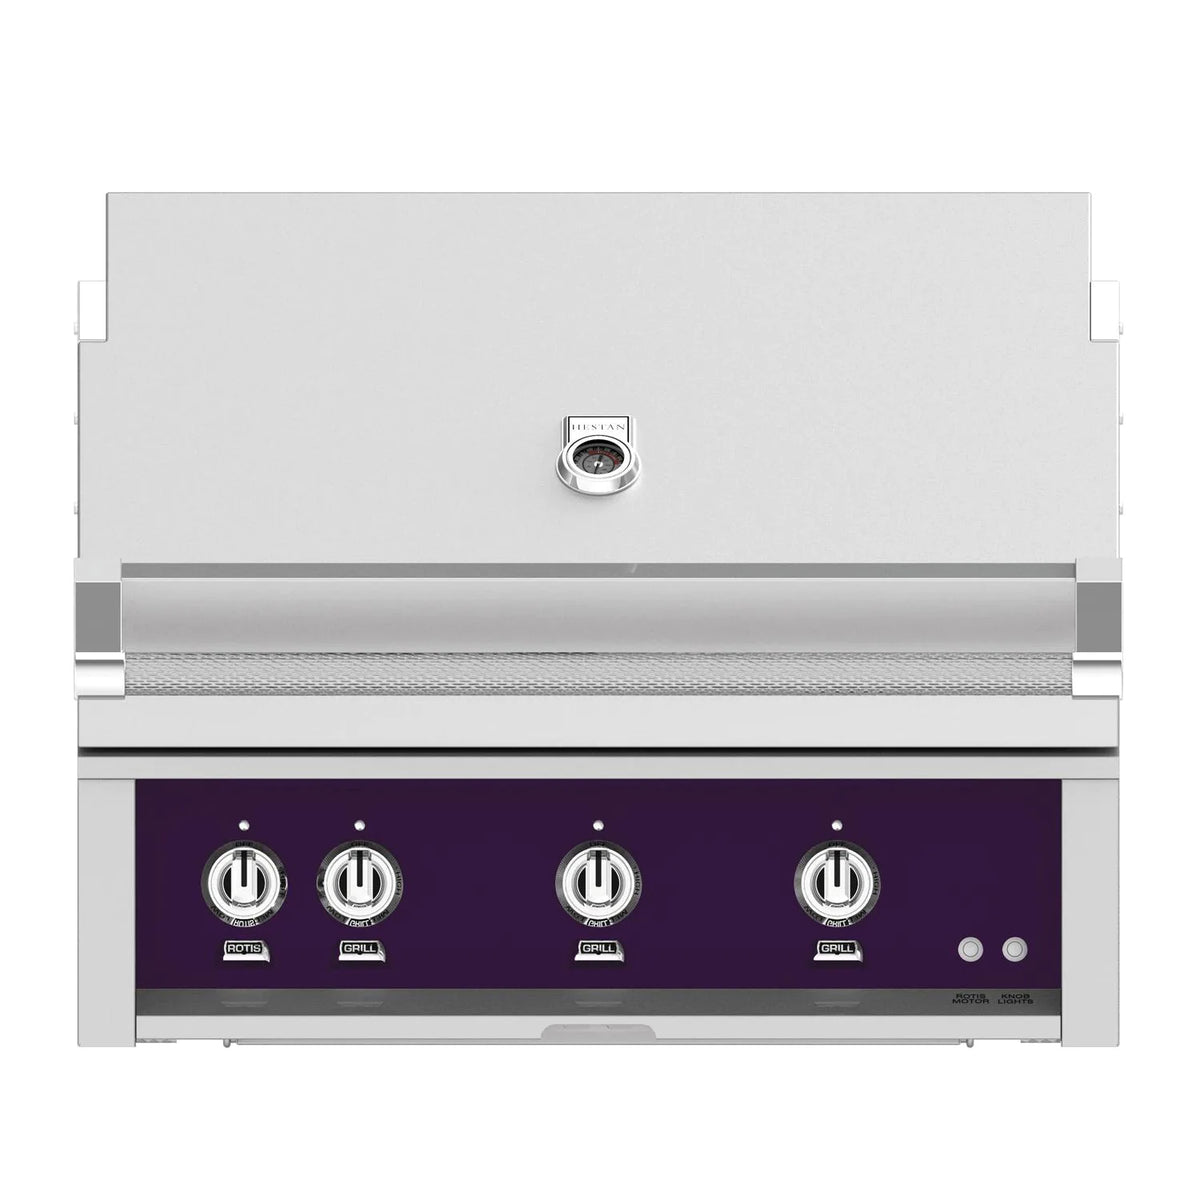 Hestan 36-Inch Built-In Gas Grill with Rotisserie in purple color